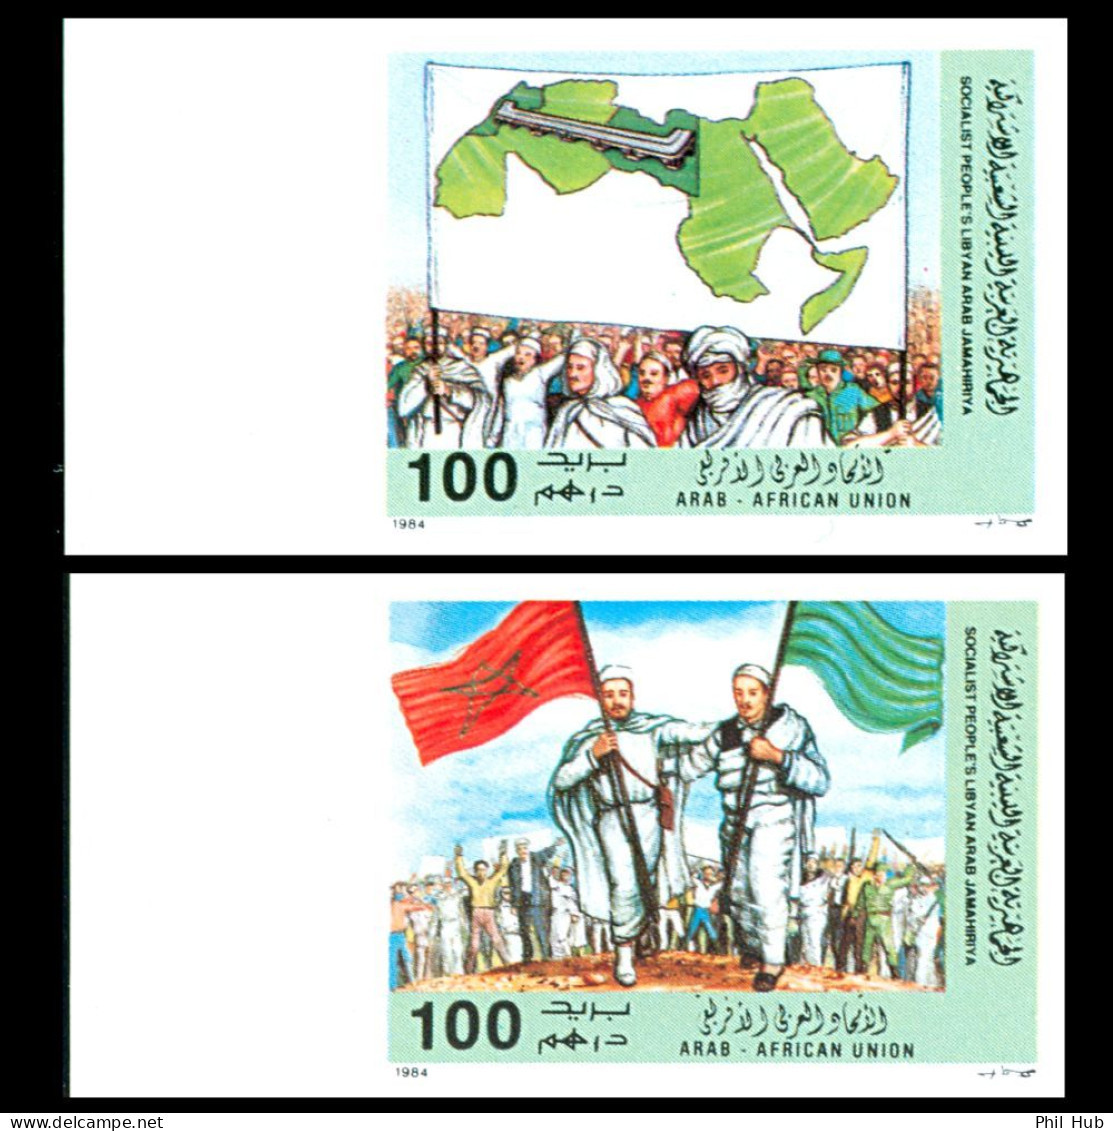 LIBYA 1984 IMPERFORATED Arab African Union Morocco Flags BORDER (MNH) - Libye